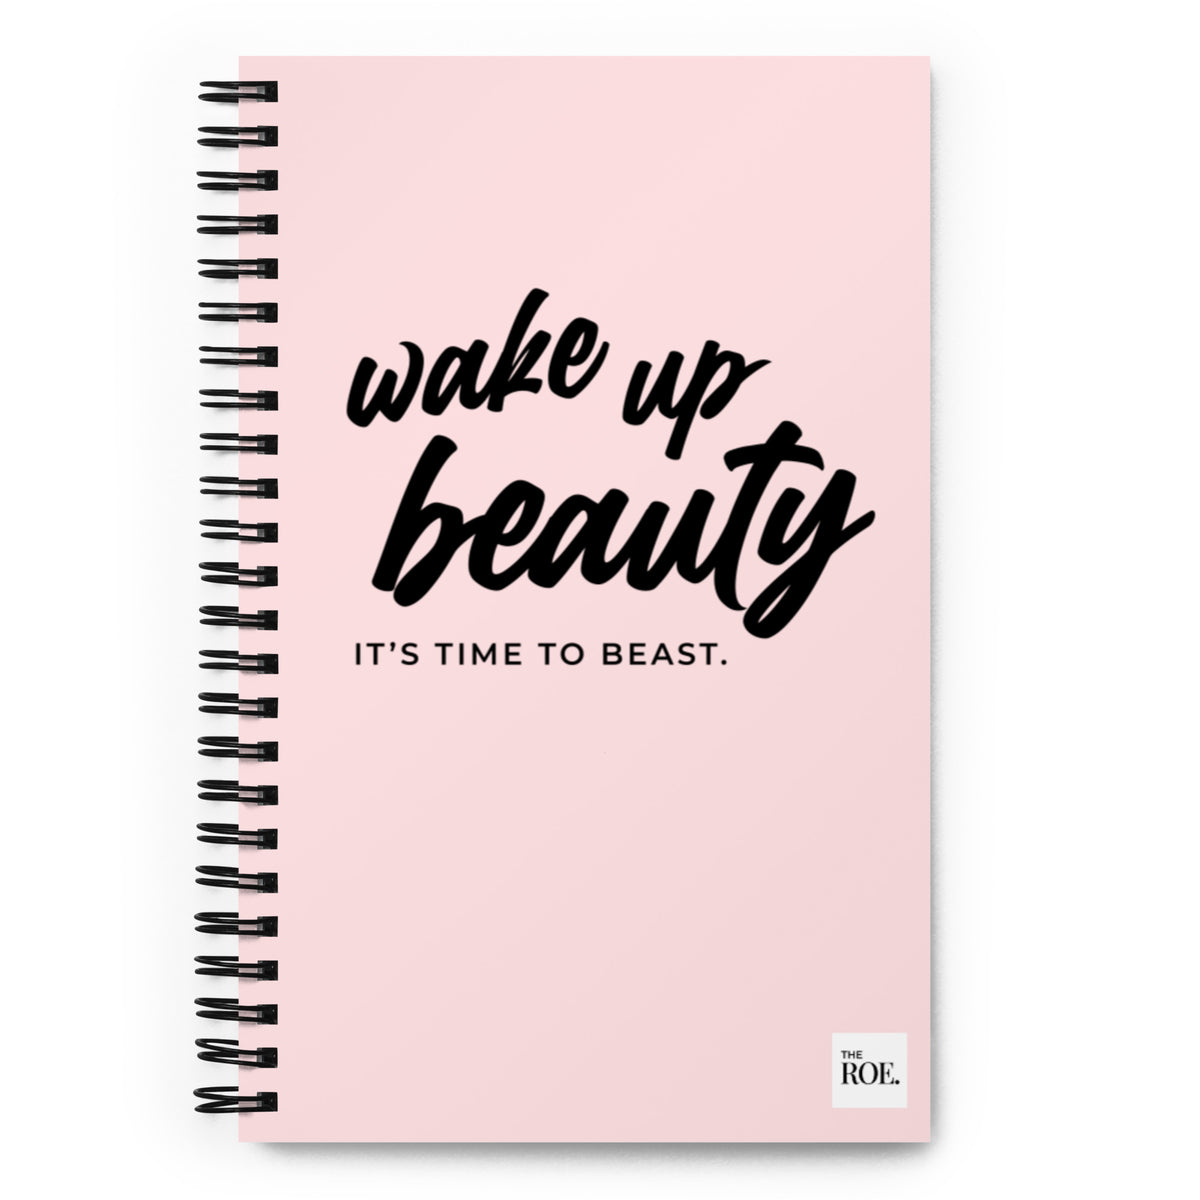 Wake up Beauty, it's time to Beast Notebook